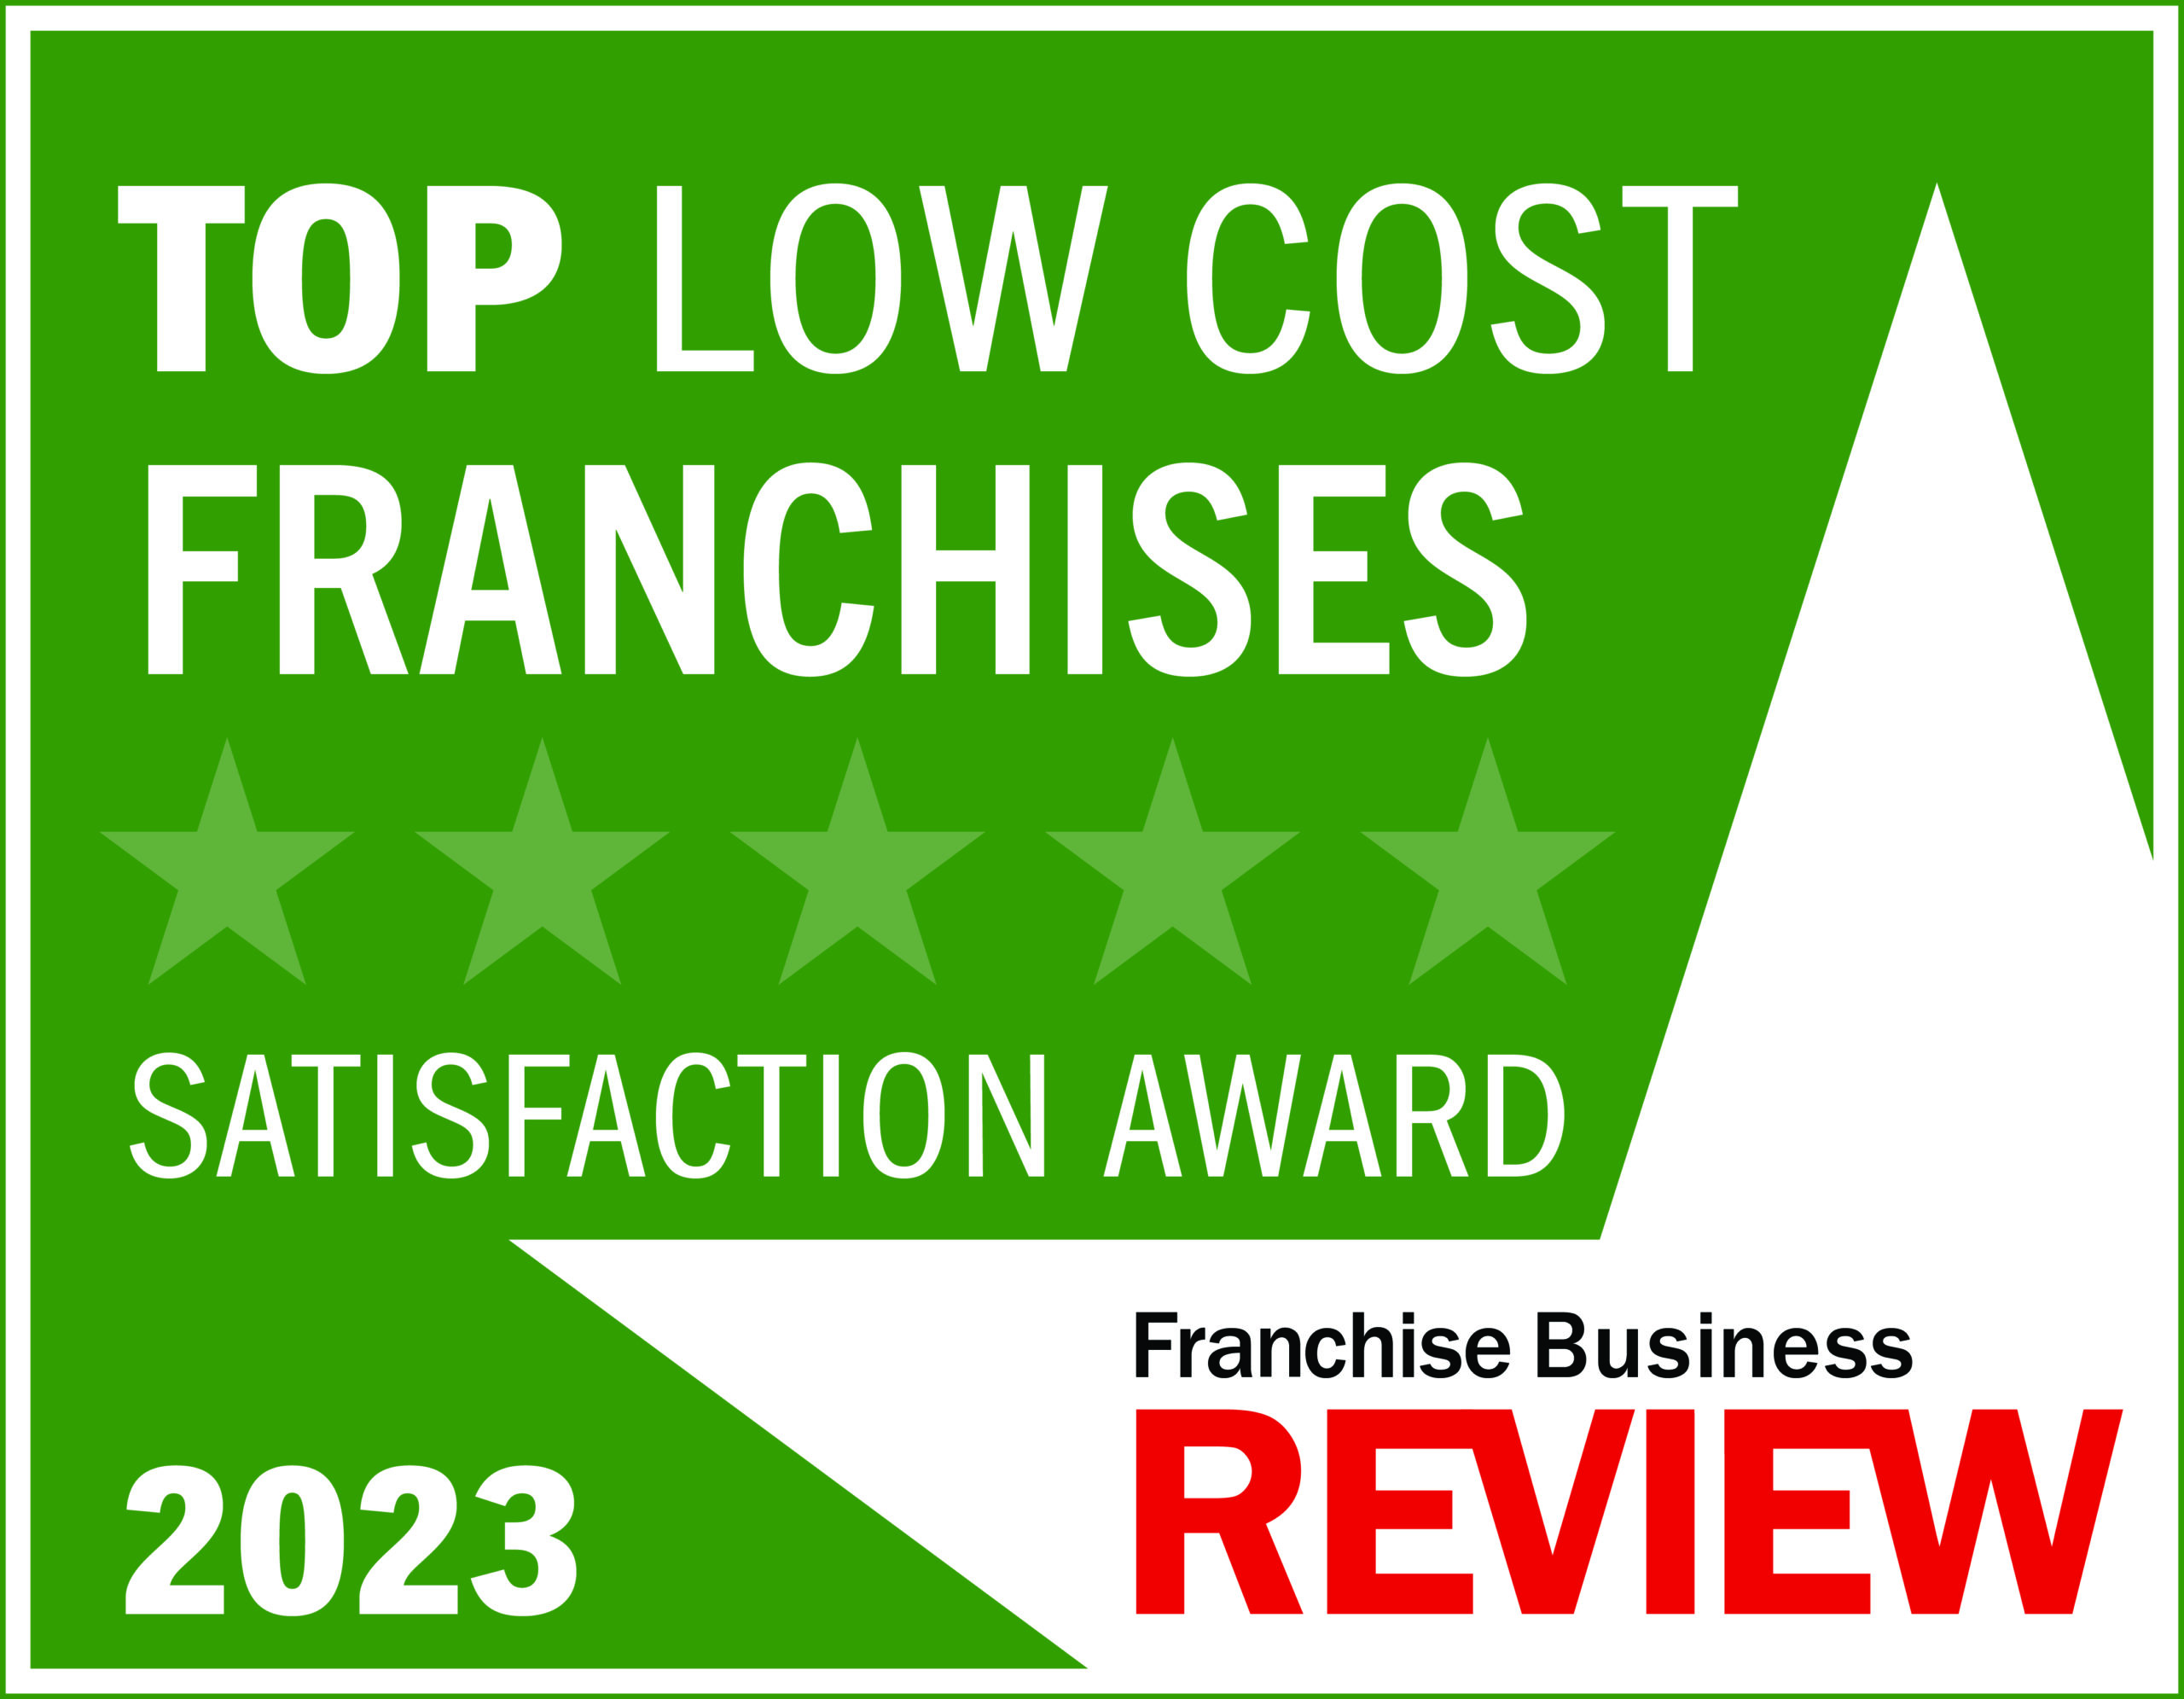 Kitchen Solvers top low cost franchise